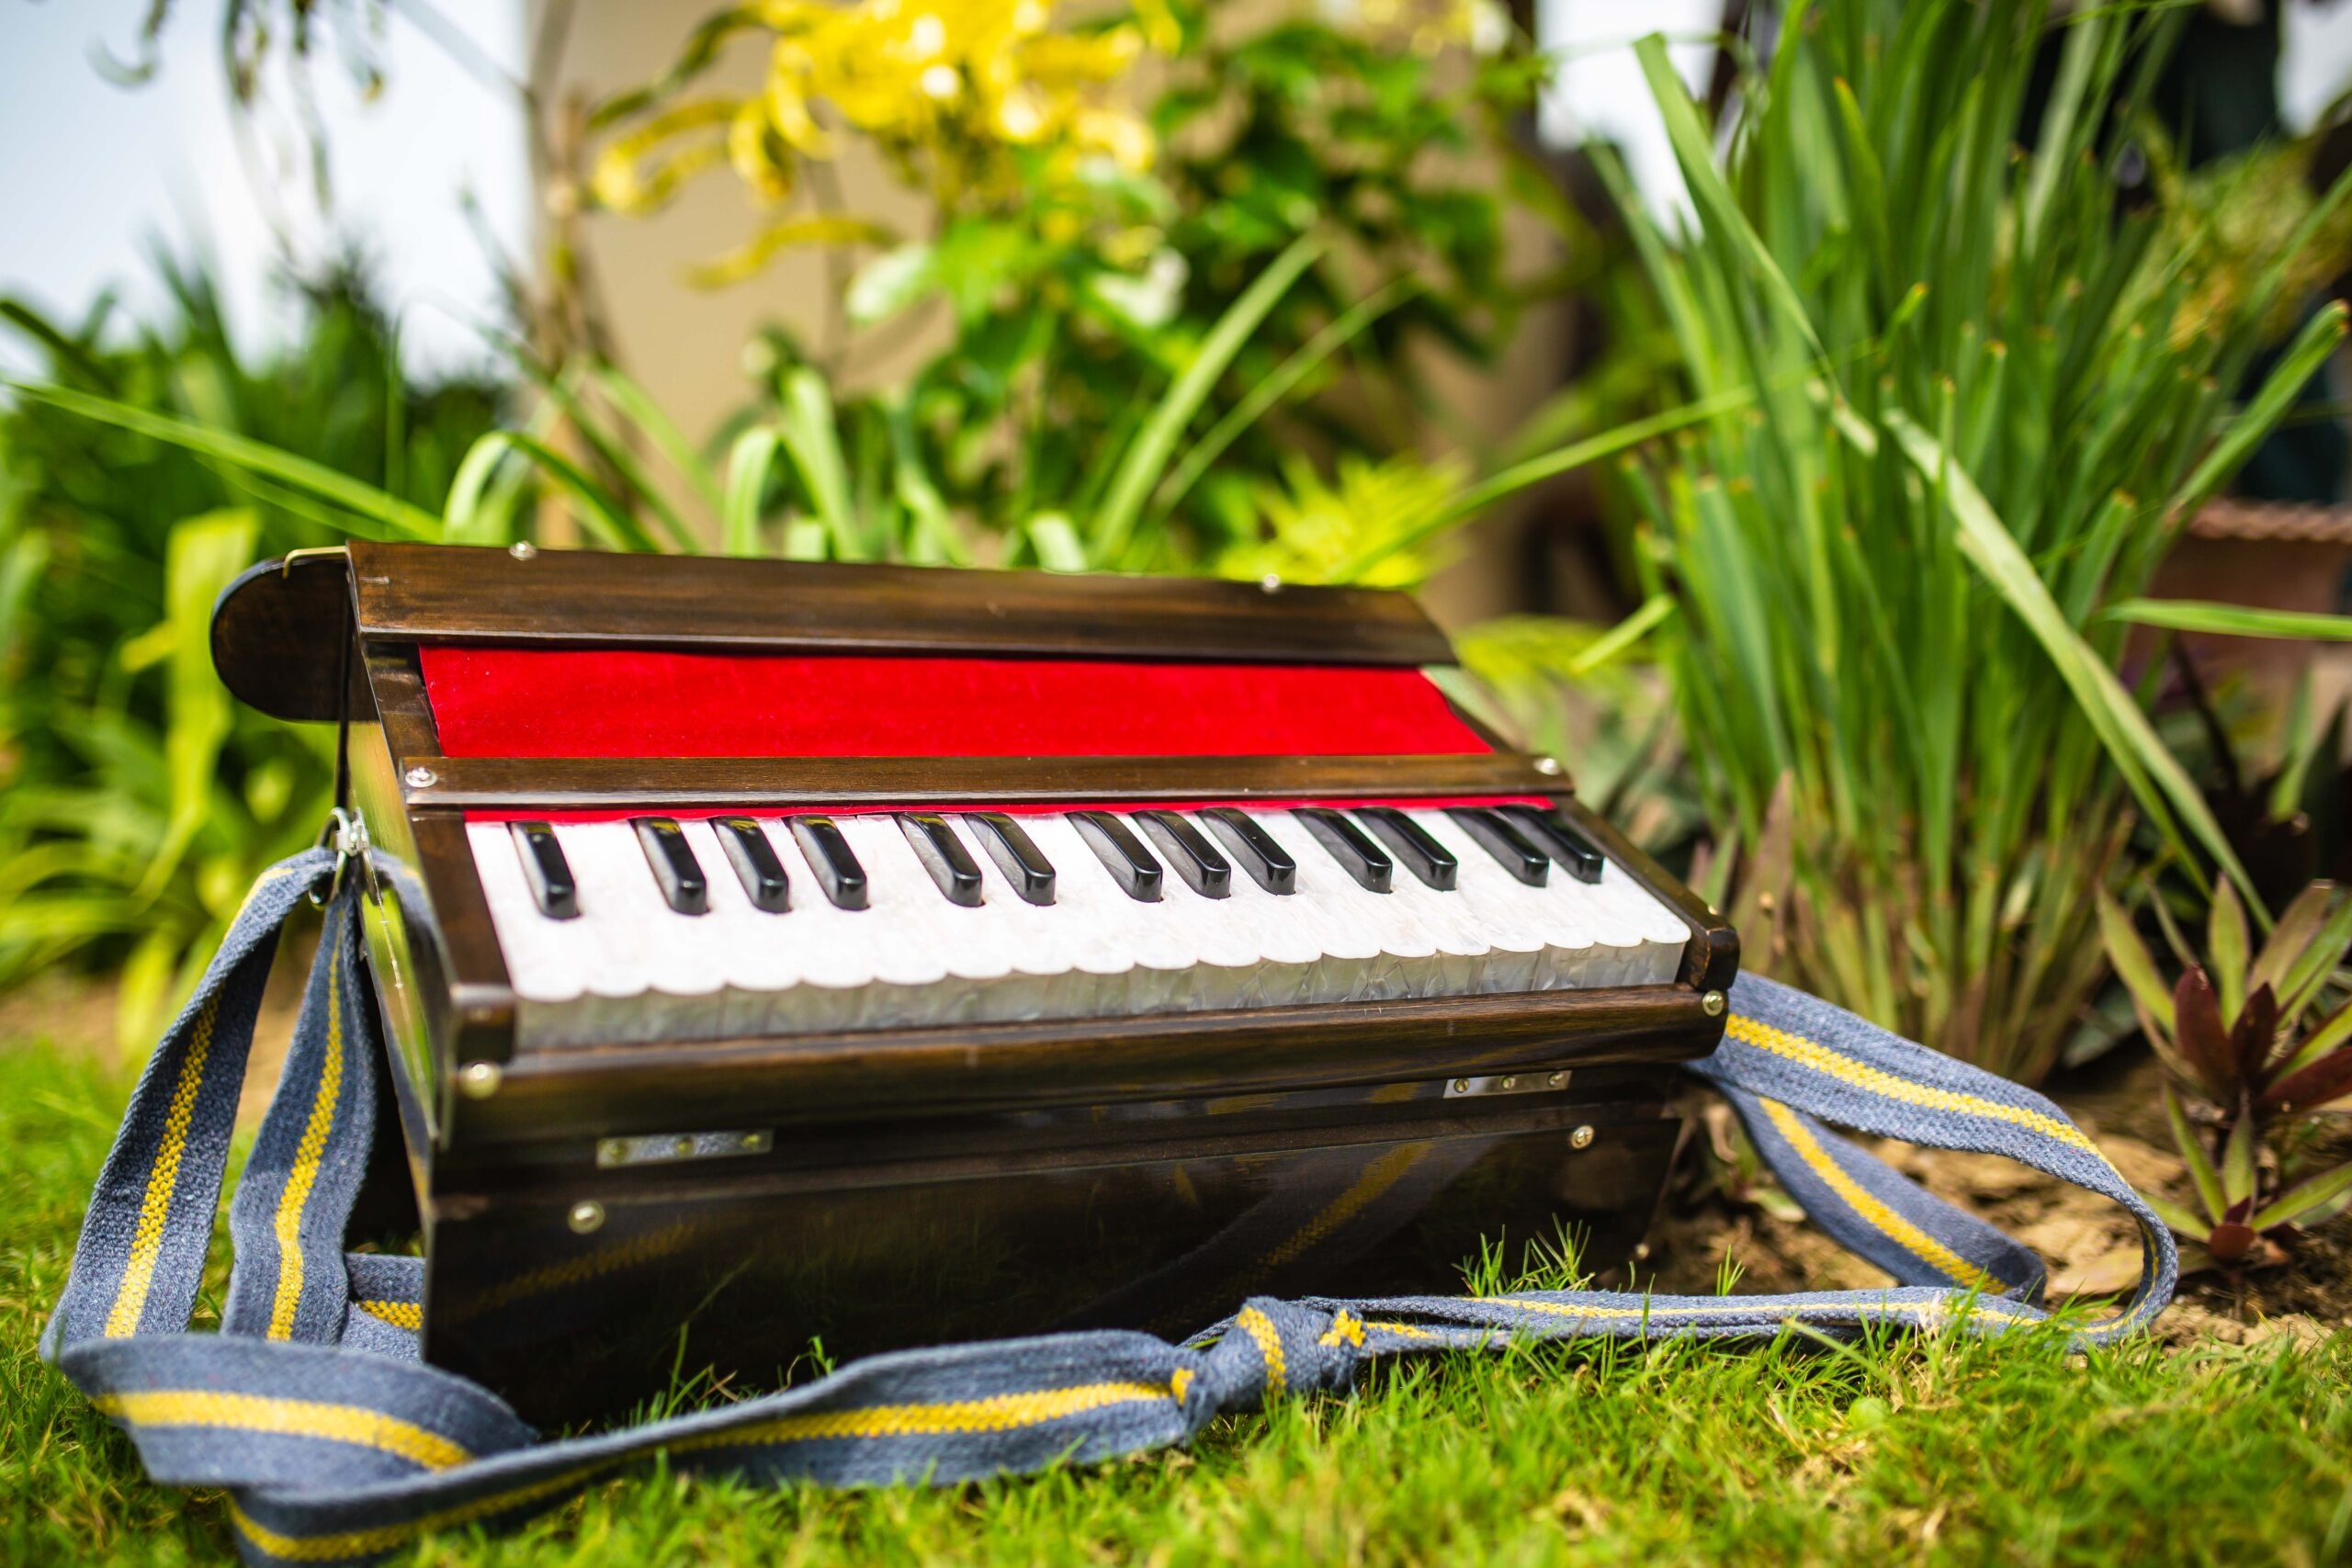 Harmonium: Mathura Harinam Style Portable Trap Organ, Fabric Strap For Comfortable Playing In The Outdoors. 2560x1710 HD Background.